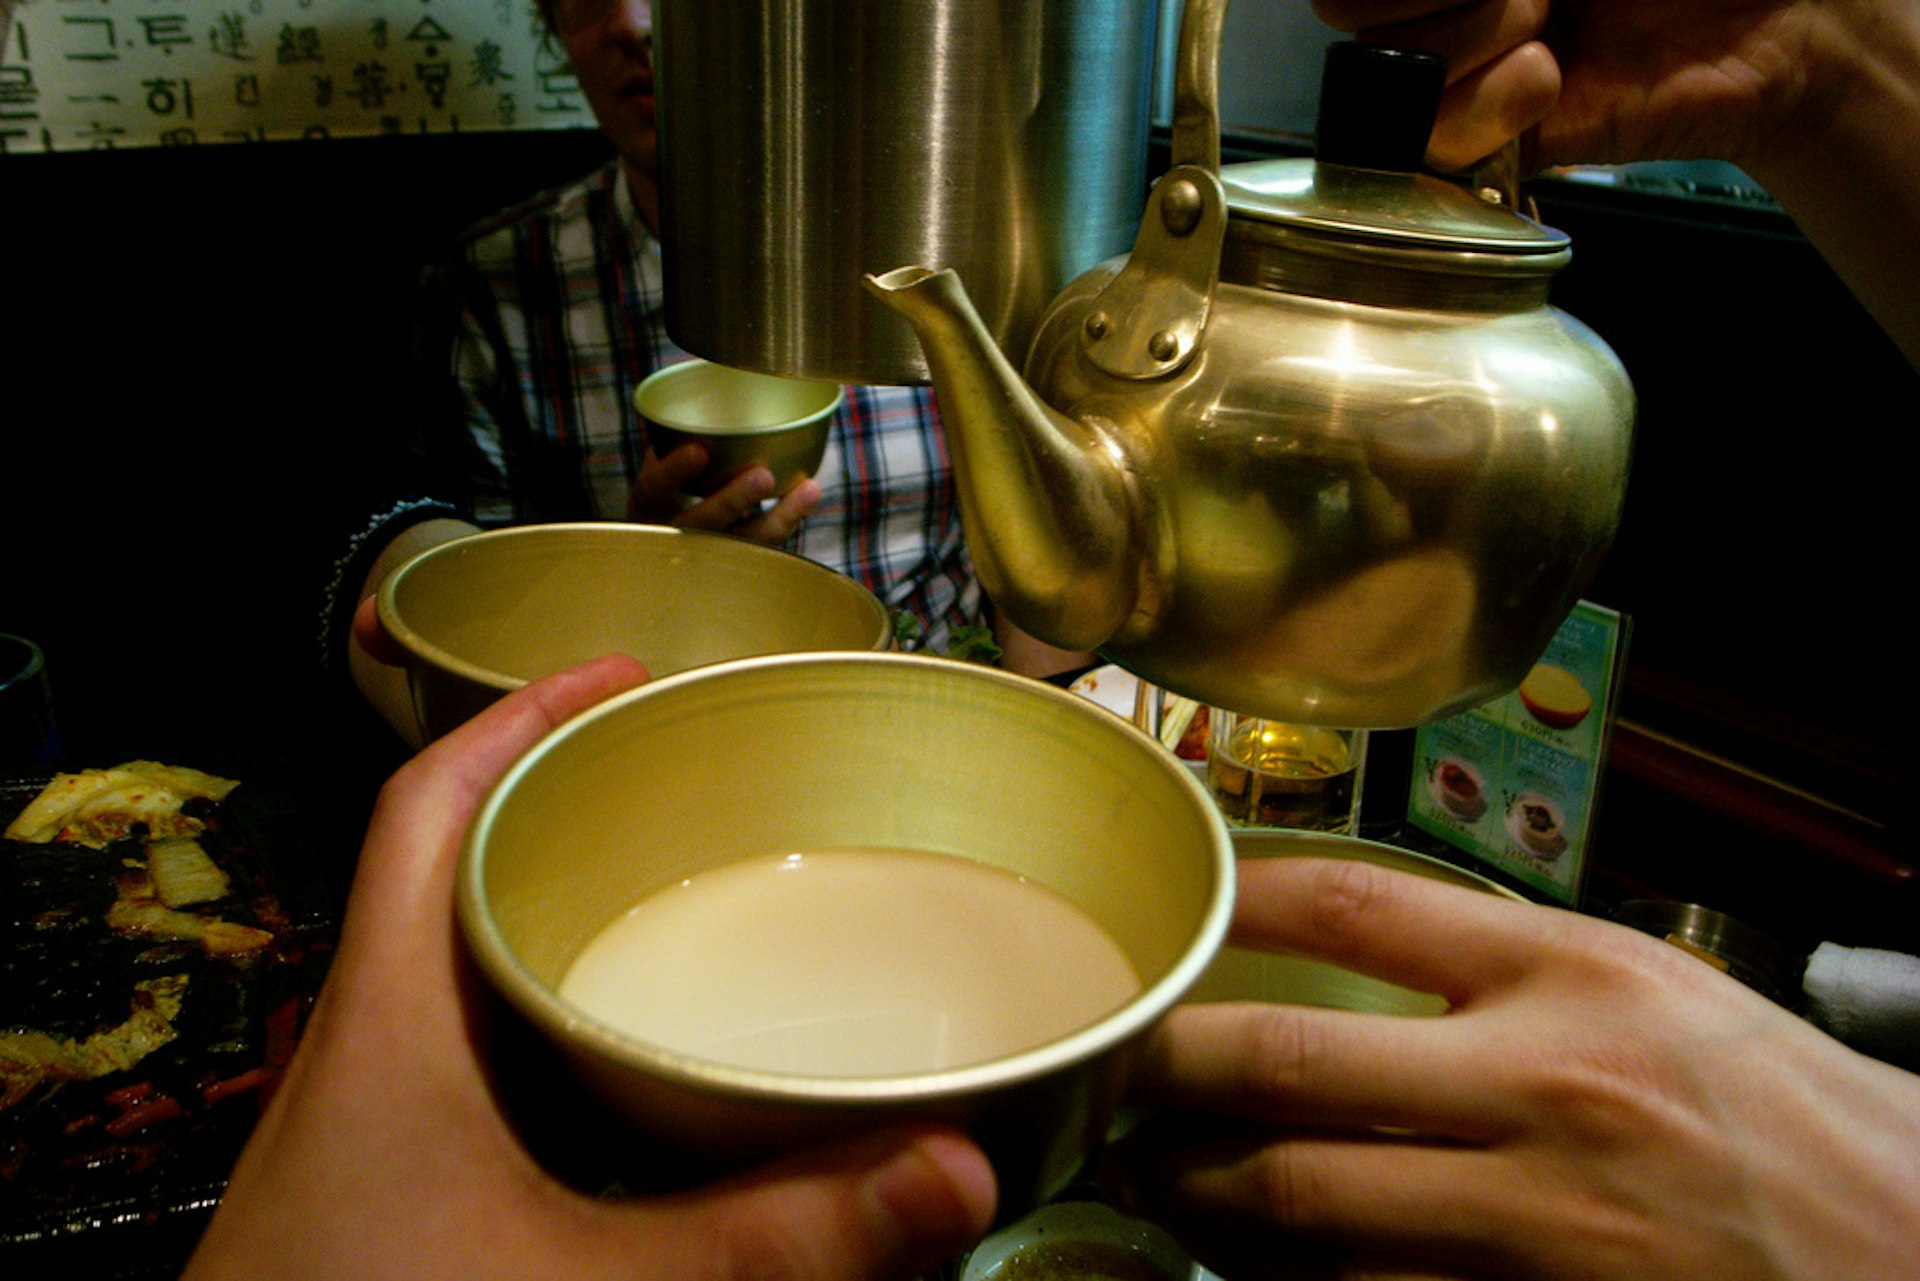 Makgeolli is served from copper kettles. Image by Jon Åslund / CC BY 2.0